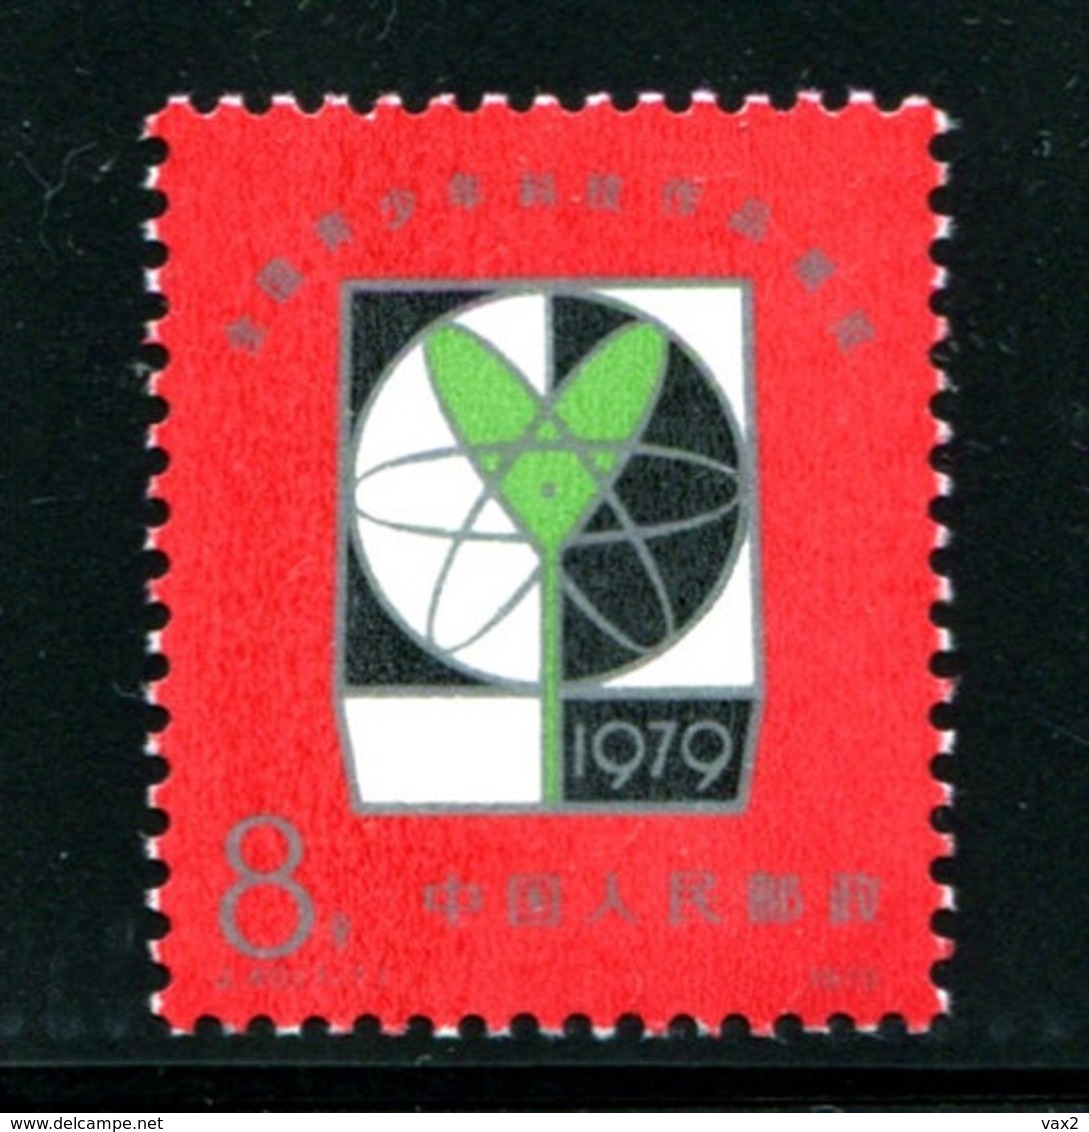 China 1979 S#1511 J40 National Scientific And Technological Exhibition Of Juniors' Works MNH - Ungebraucht